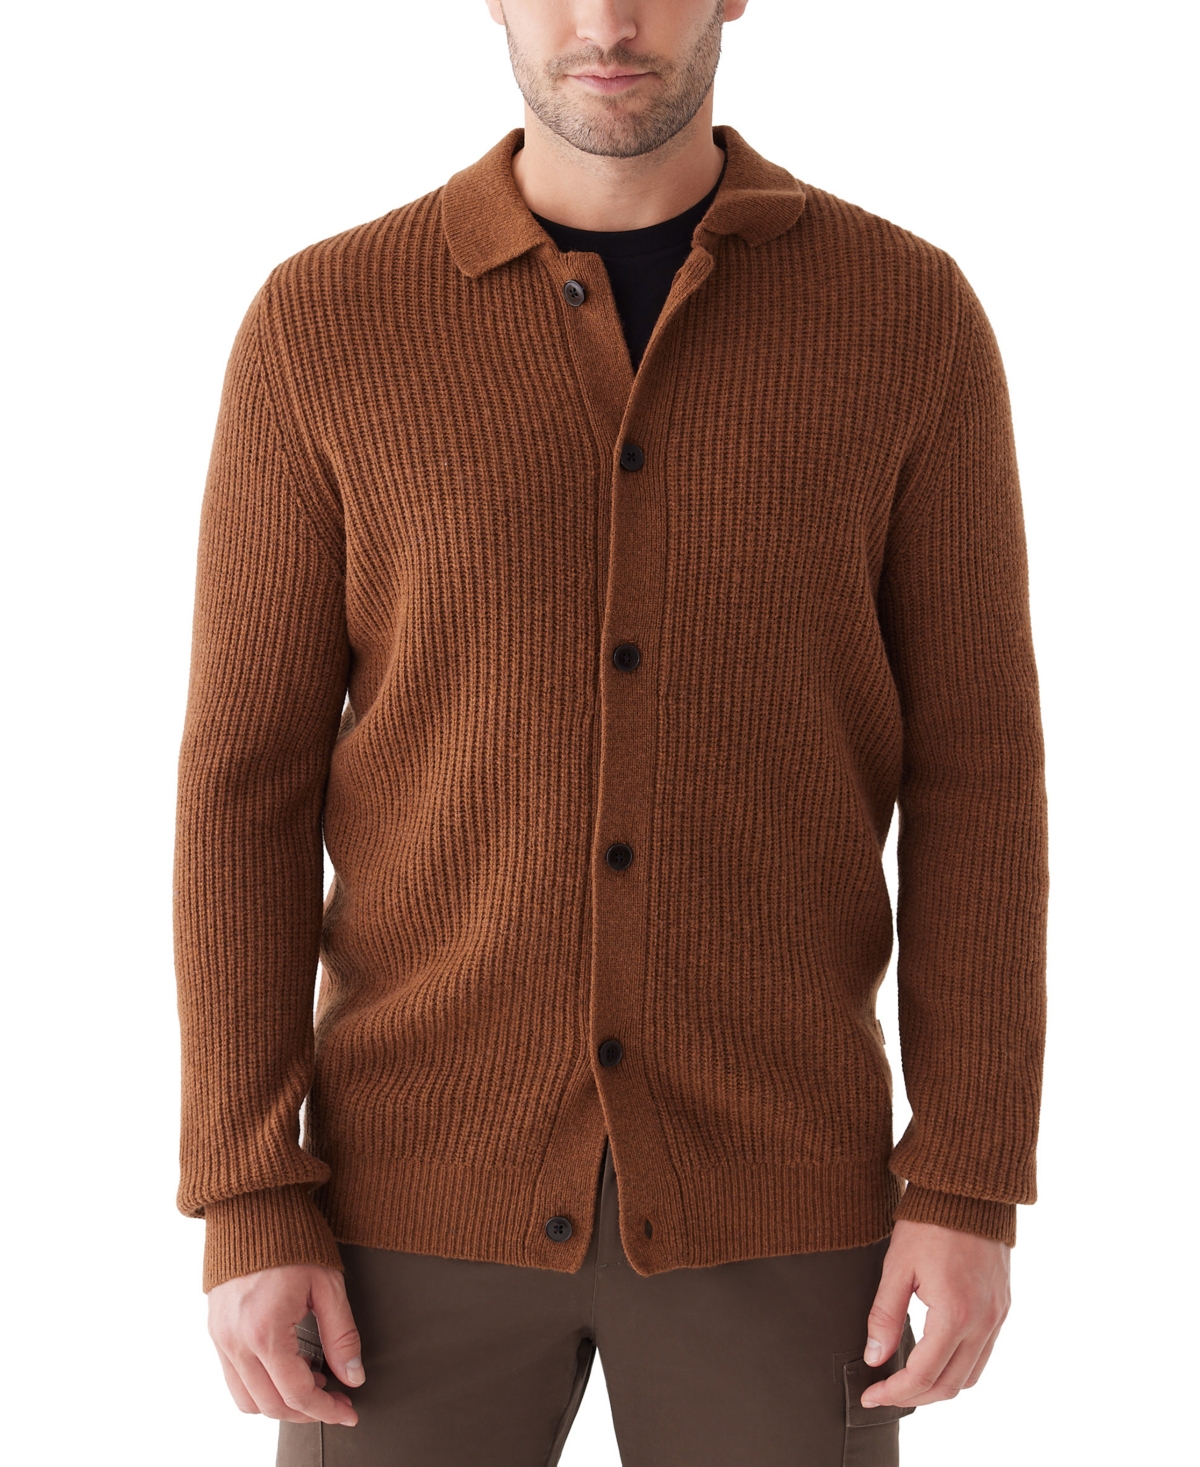 Men's Collared Button Sweater Overshirt - Spice